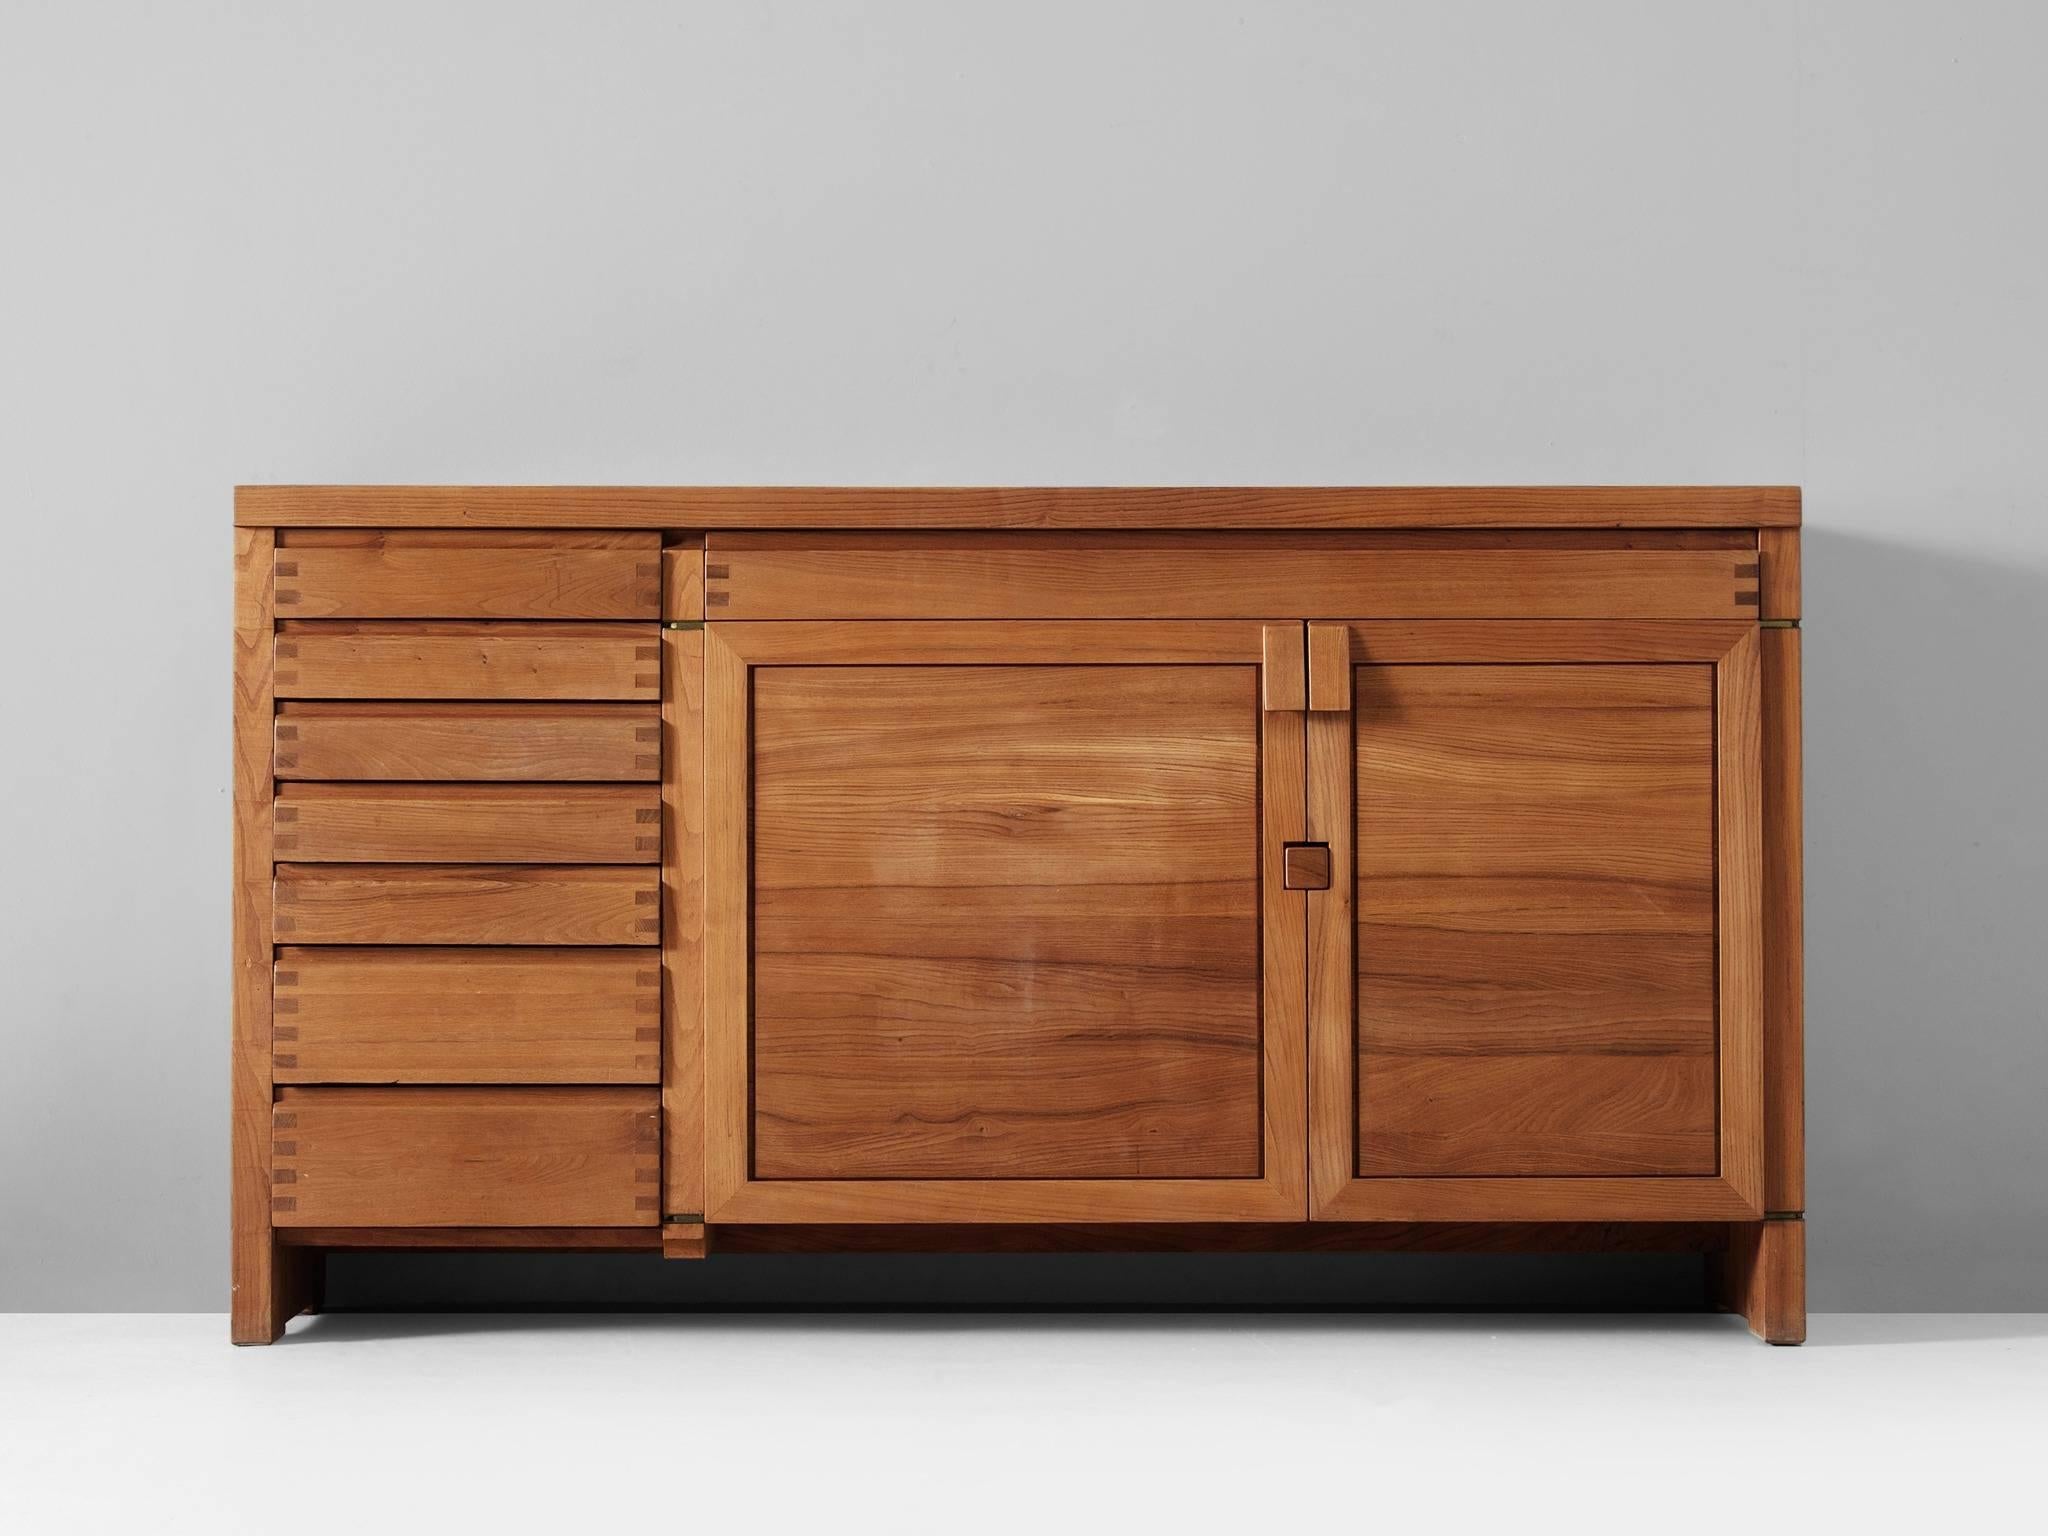 Sideboard model R13, in elm, by Pierre Chapo, France 1960s.

This well crafted credenza shows the basic design and sincere construction details, which characterize Chapo's work. The frontal view is interesting, due to the well proportioned doors